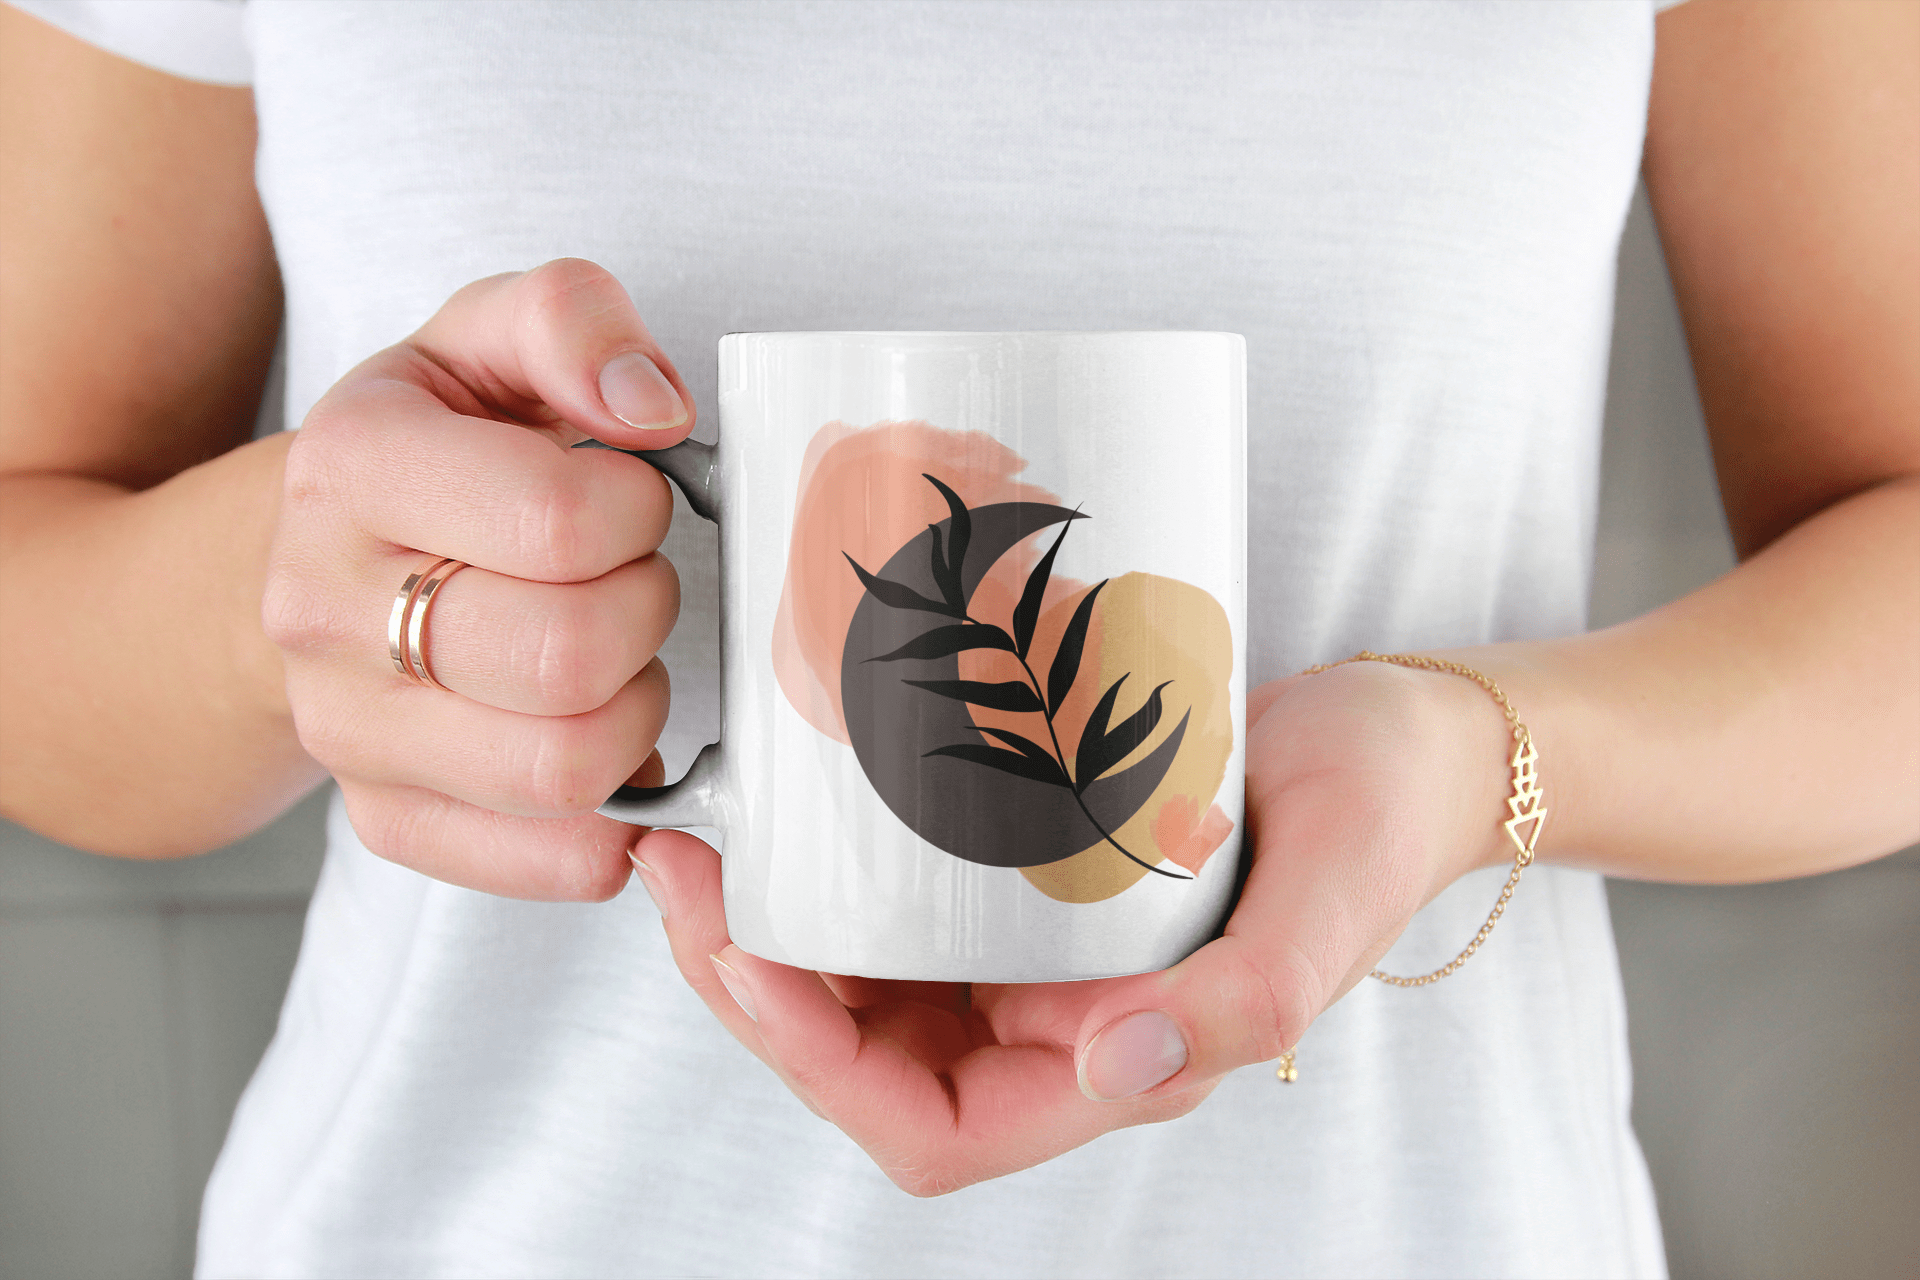 Bohemian Moon Night Abstract Modern Art Coffee Tea Cup Mug Mug A Moment Of Now Women’s Boutique Clothing Online Lifestyle Store